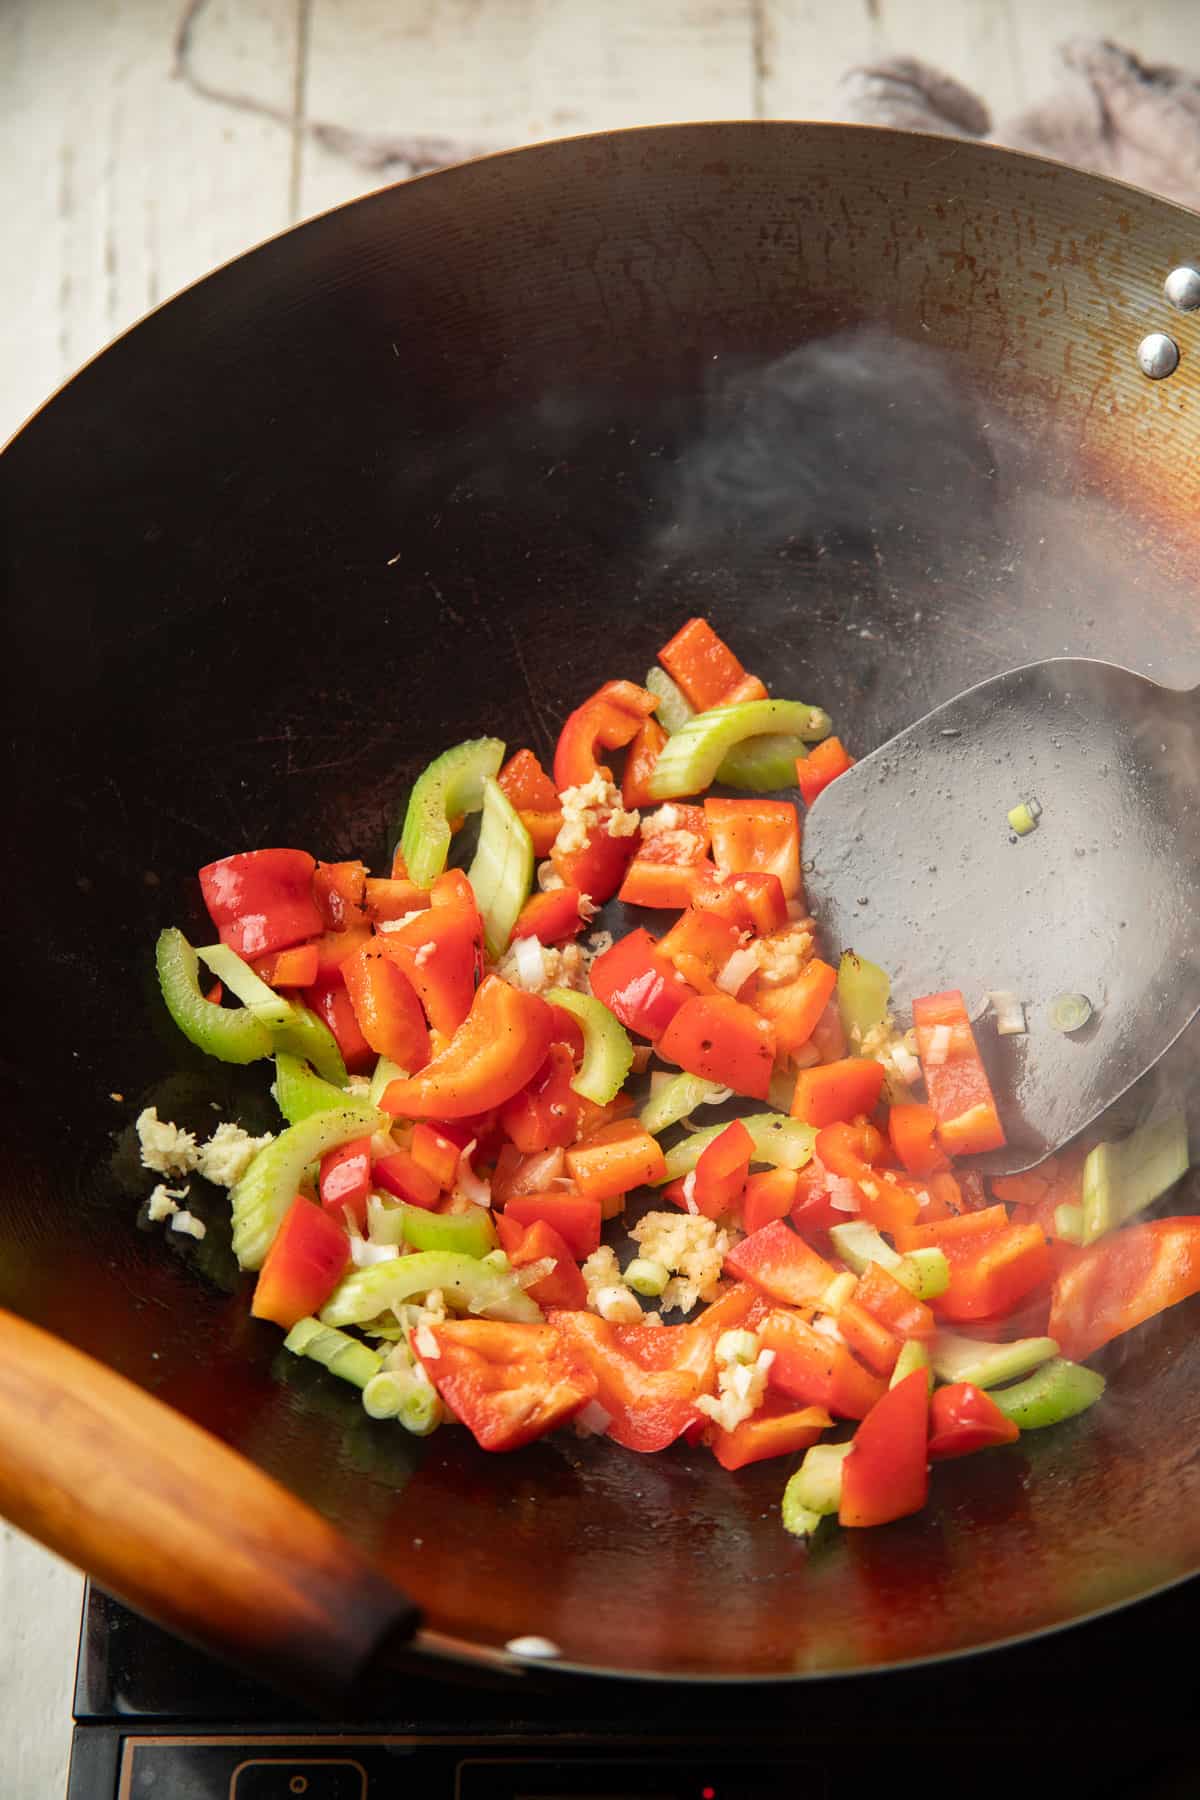 Vegetables and aromatics cooking in a wok.